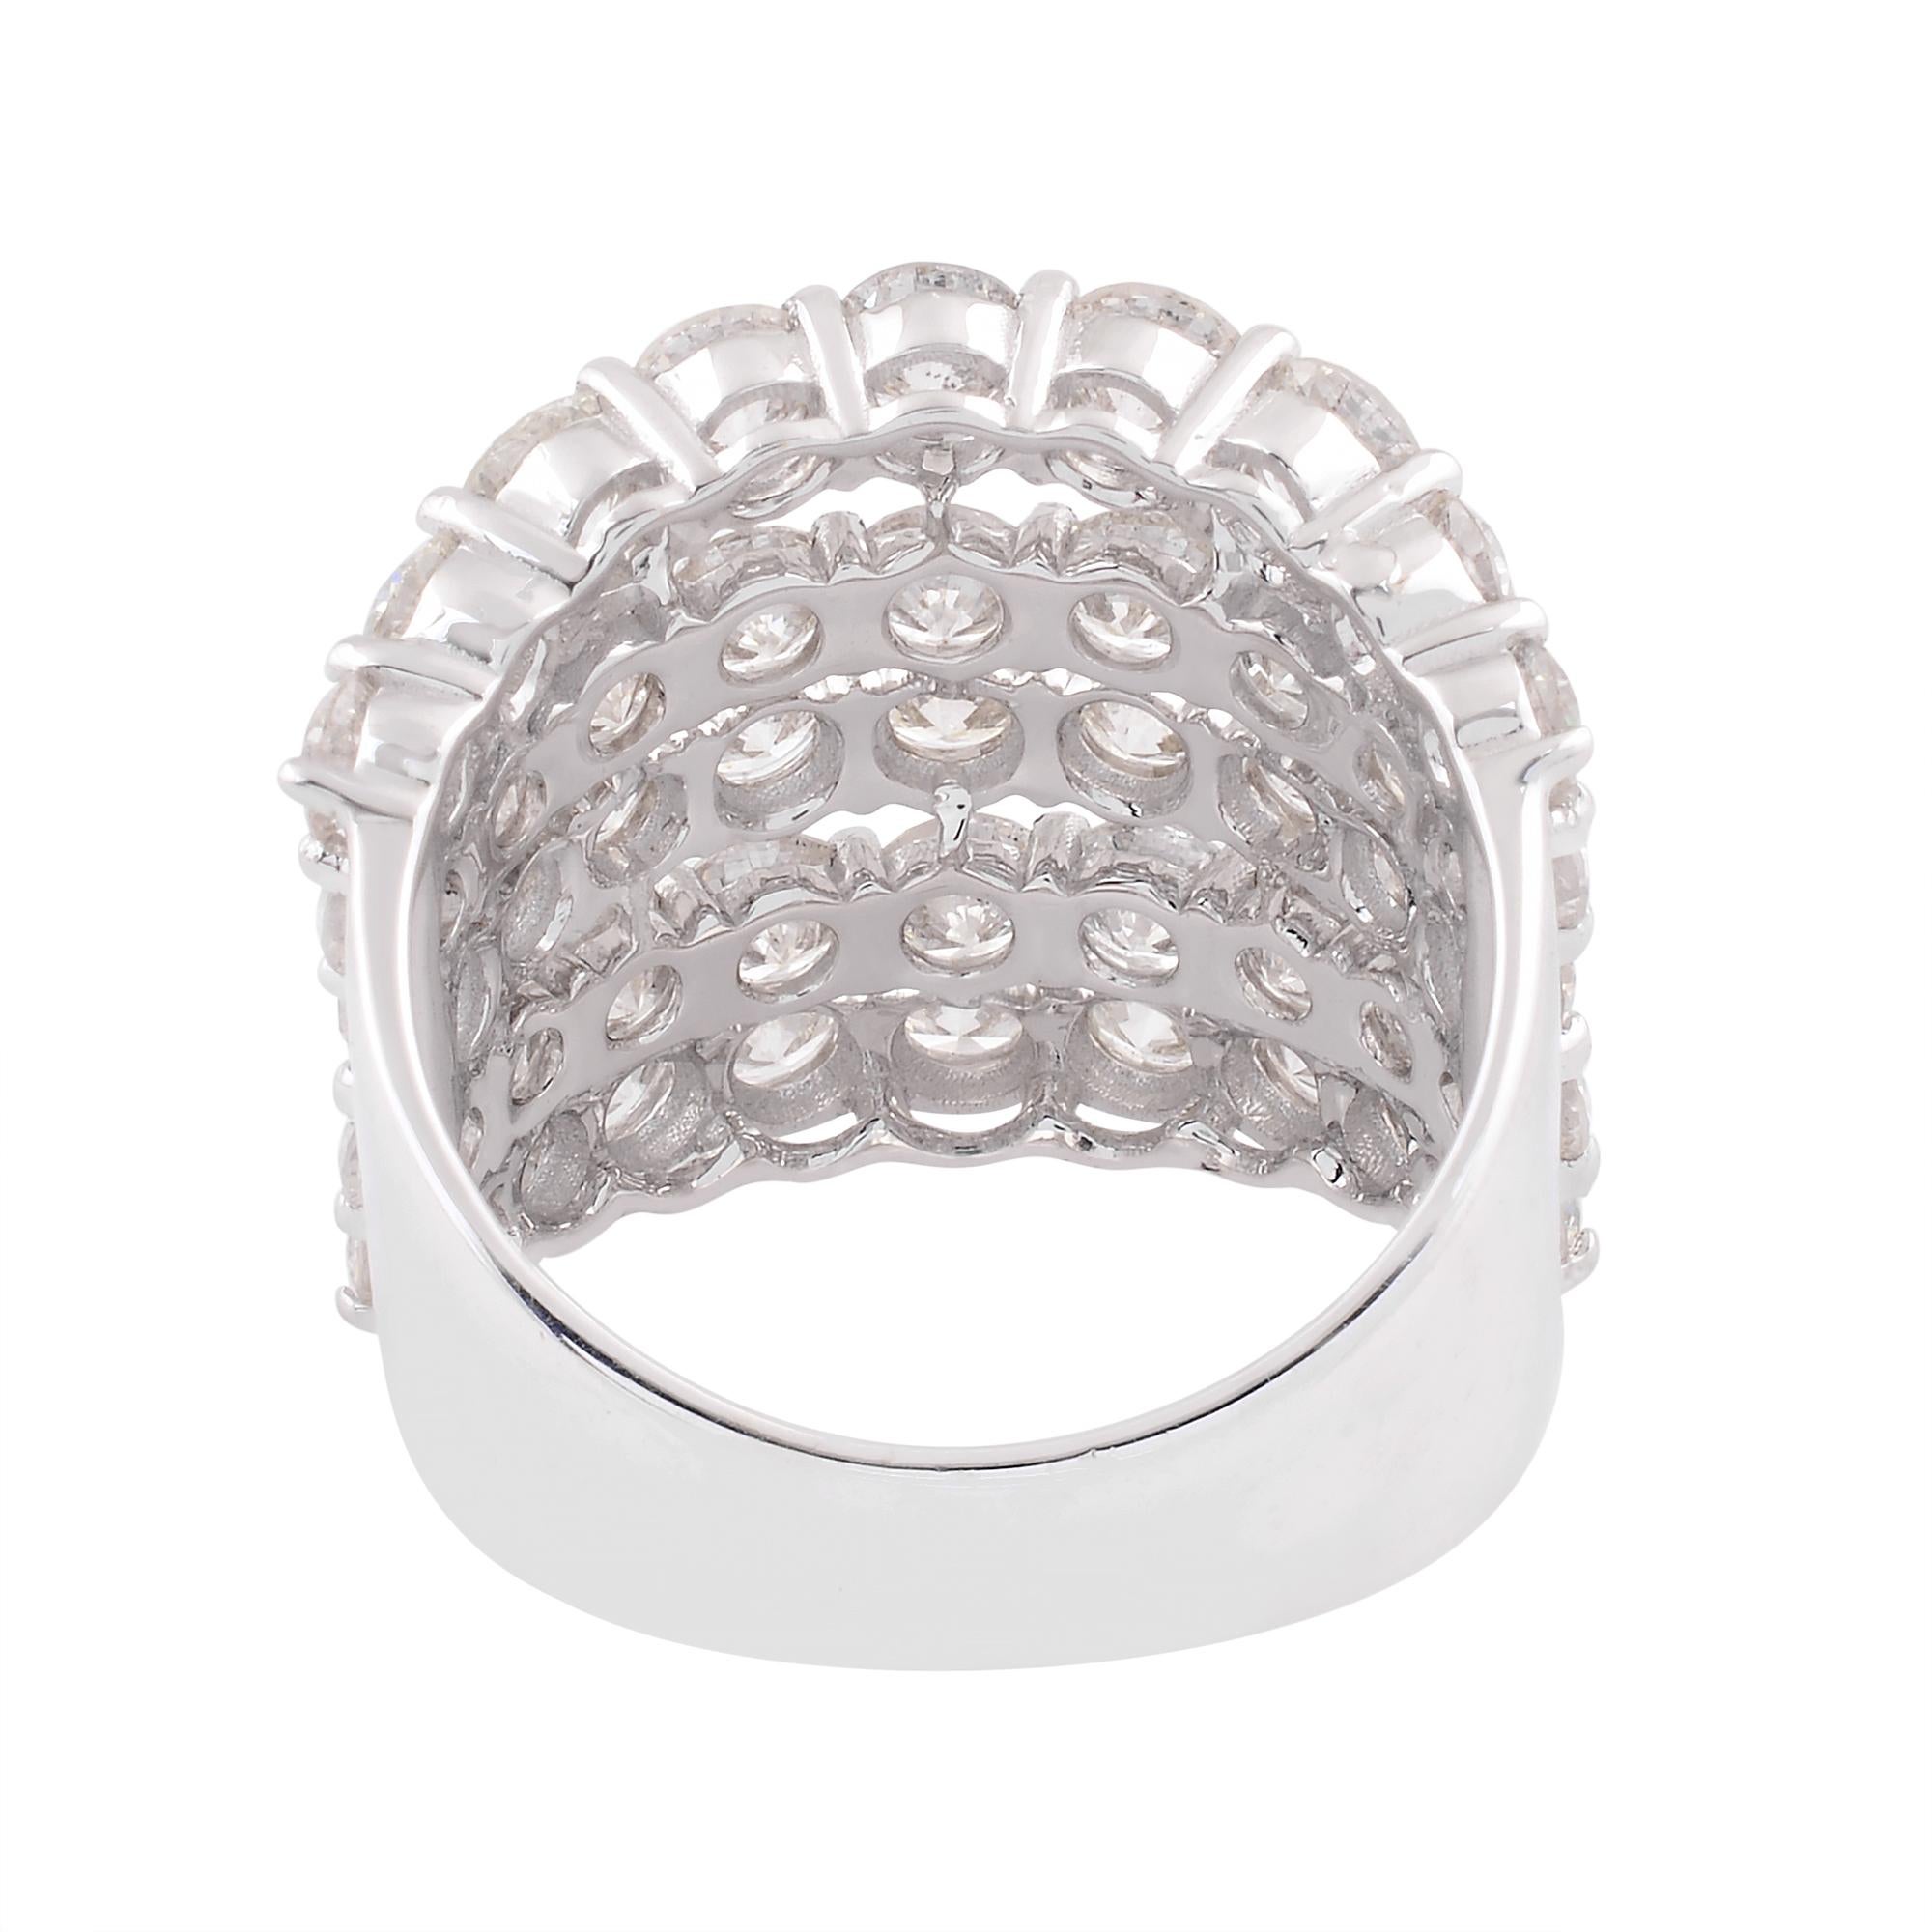 For Sale:  Natural 5.75 Carat Diamond Multi Layer Dome Ring Solid 18k White Gold Jewelry 3